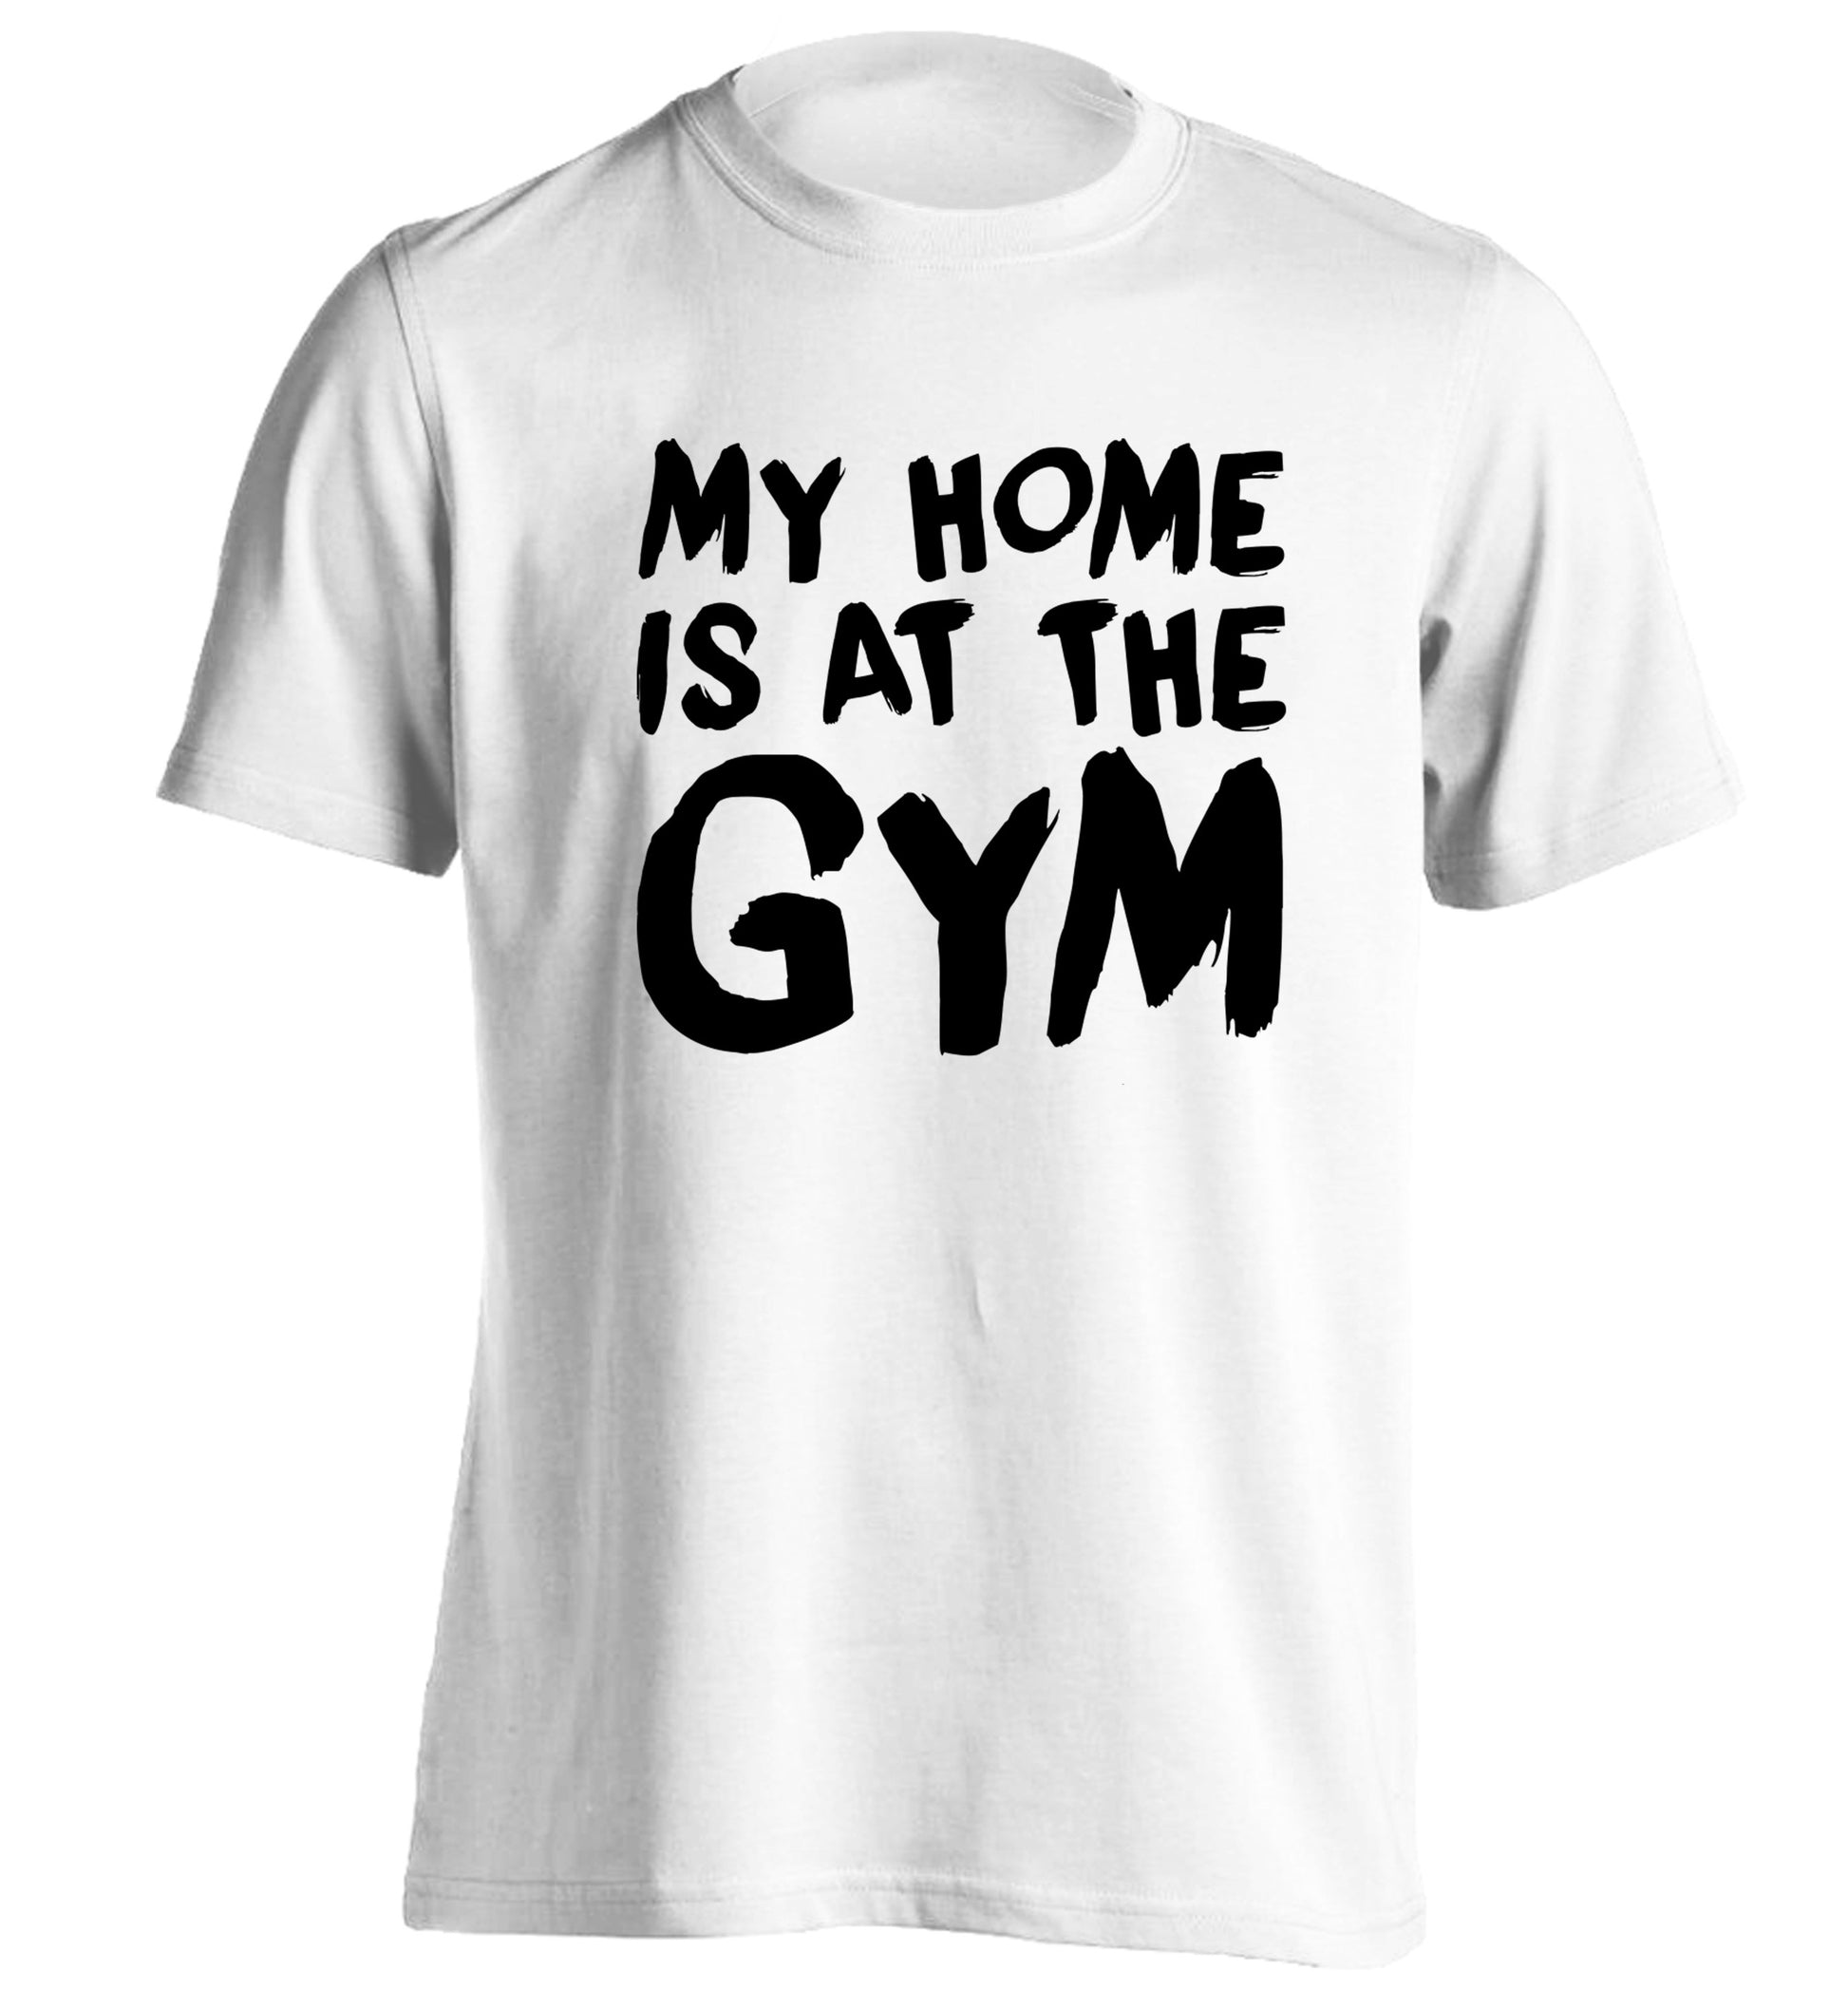 My home is at the gym adults unisex white Tshirt 2XL